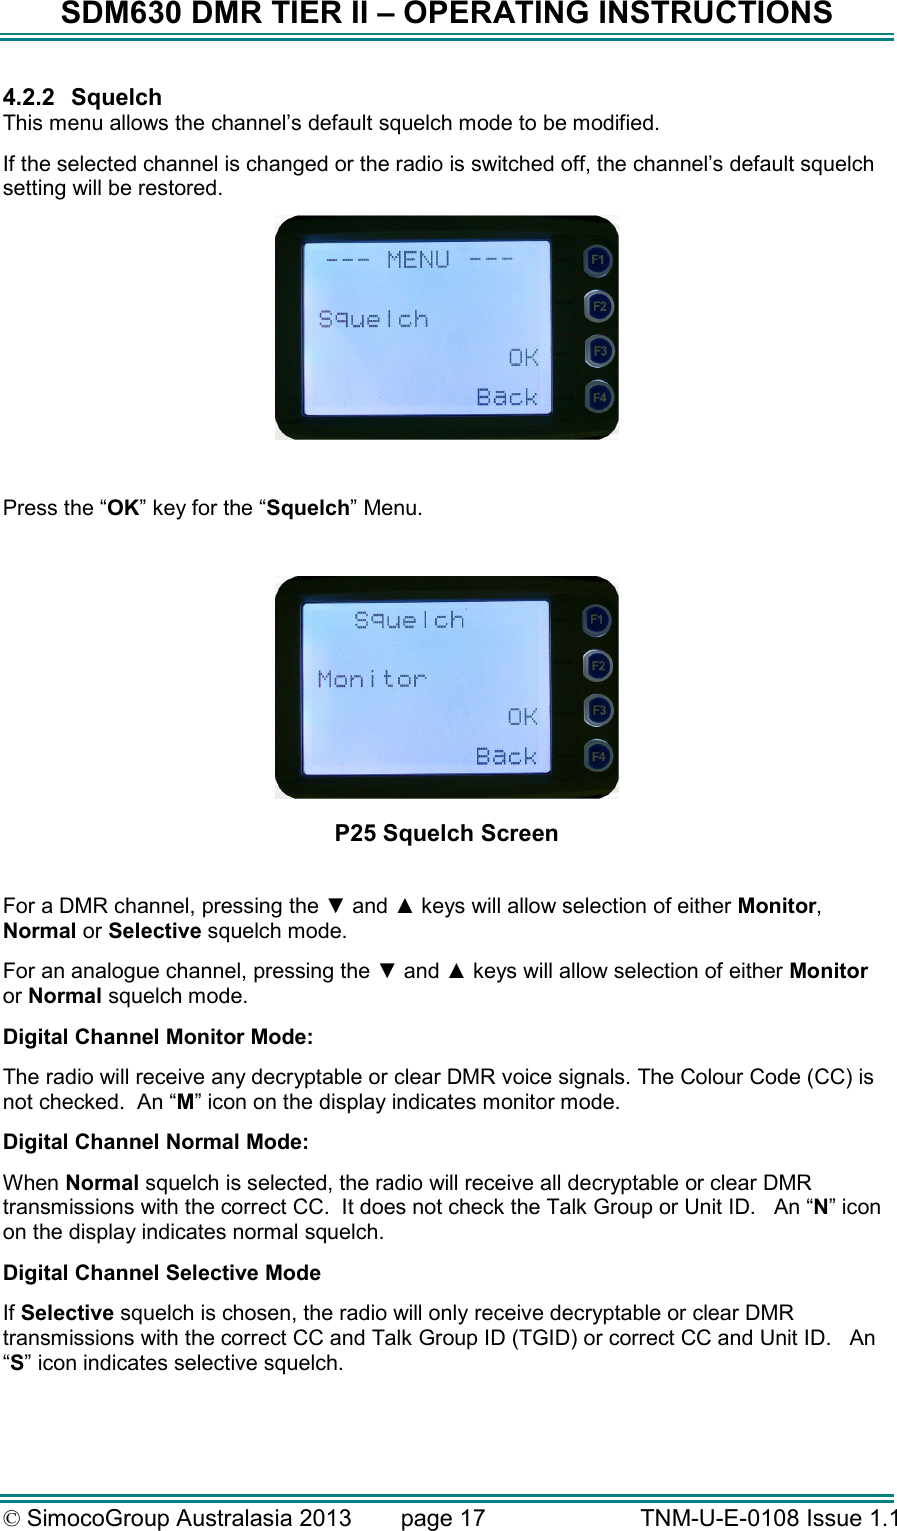 SDM630 DMR TIER II – OPERATING INSTRUCTIONS © SimocoGroup Australasia 2013   page 17   TNM-U-E-0108 Issue 1.1 4.2.2  Squelch This menu allows the channel’s default squelch mode to be modified. If the selected channel is changed or the radio is switched off, the channel’s default squelch setting will be restored.   Press the “OK” key for the “Squelch” Menu.   P25 Squelch Screen  For a DMR channel, pressing the ▼ and ▲ keys will allow selection of either Monitor, Normal or Selective squelch mode.   For an analogue channel, pressing the ▼ and ▲ keys will allow selection of either Monitor or Normal squelch mode.   Digital Channel Monitor Mode:   The radio will receive any decryptable or clear DMR voice signals. The Colour Code (CC) is not checked.  An “M” icon on the display indicates monitor mode. Digital Channel Normal Mode: When Normal squelch is selected, the radio will receive all decryptable or clear DMR transmissions with the correct CC.  It does not check the Talk Group or Unit ID.   An “N” icon on the display indicates normal squelch. Digital Channel Selective Mode If Selective squelch is chosen, the radio will only receive decryptable or clear DMR transmissions with the correct CC and Talk Group ID (TGID) or correct CC and Unit ID.   An “S” icon indicates selective squelch. 